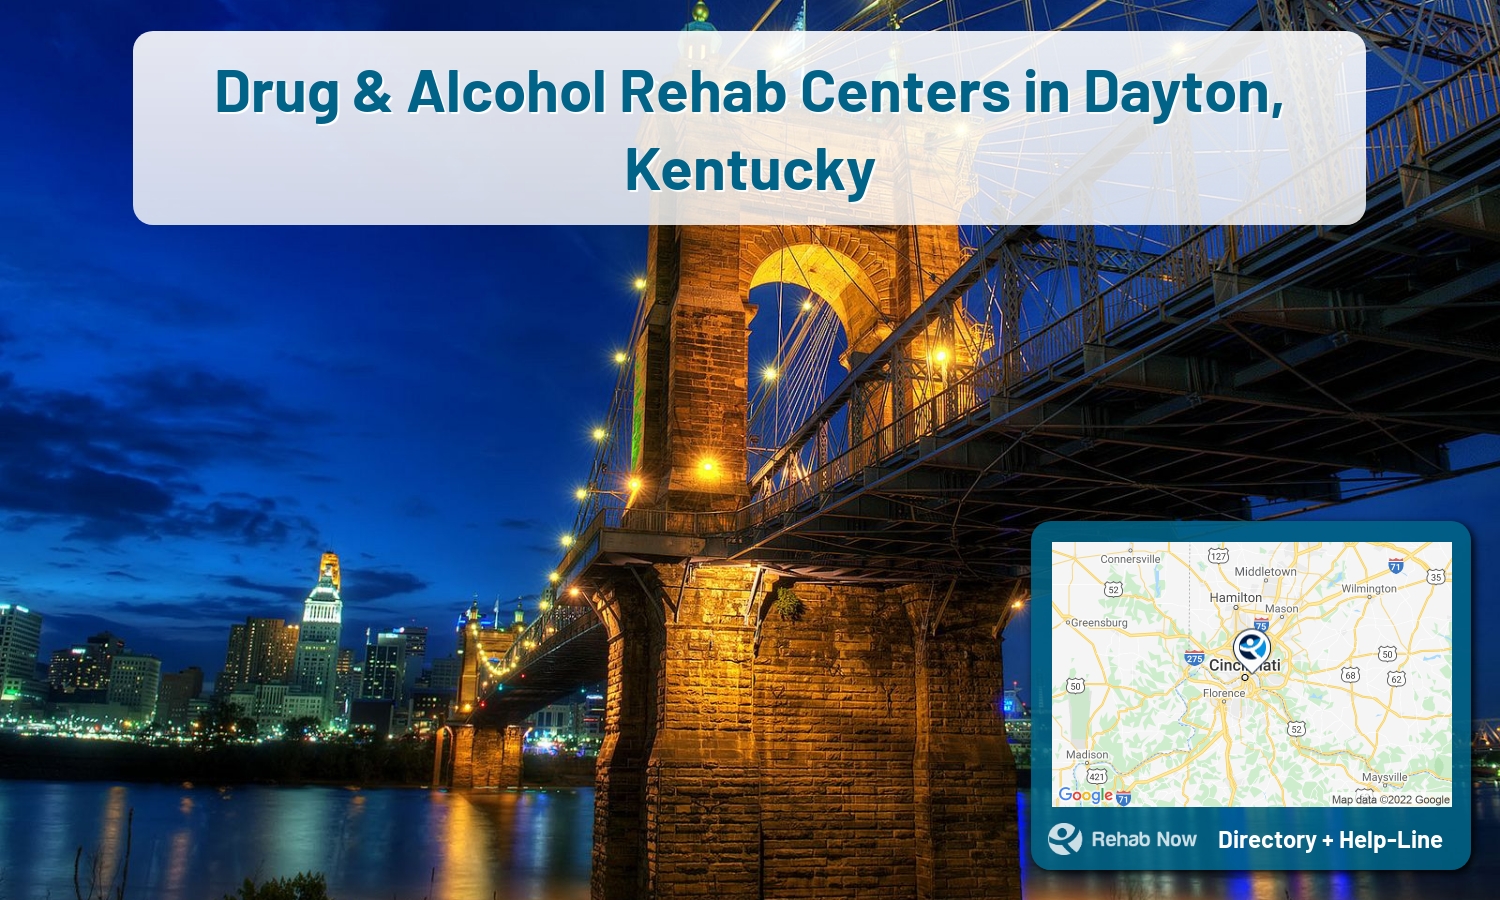 Find drug rehab and alcohol treatment services in Dayton. Our experts help you find a center in Dayton, Kentucky